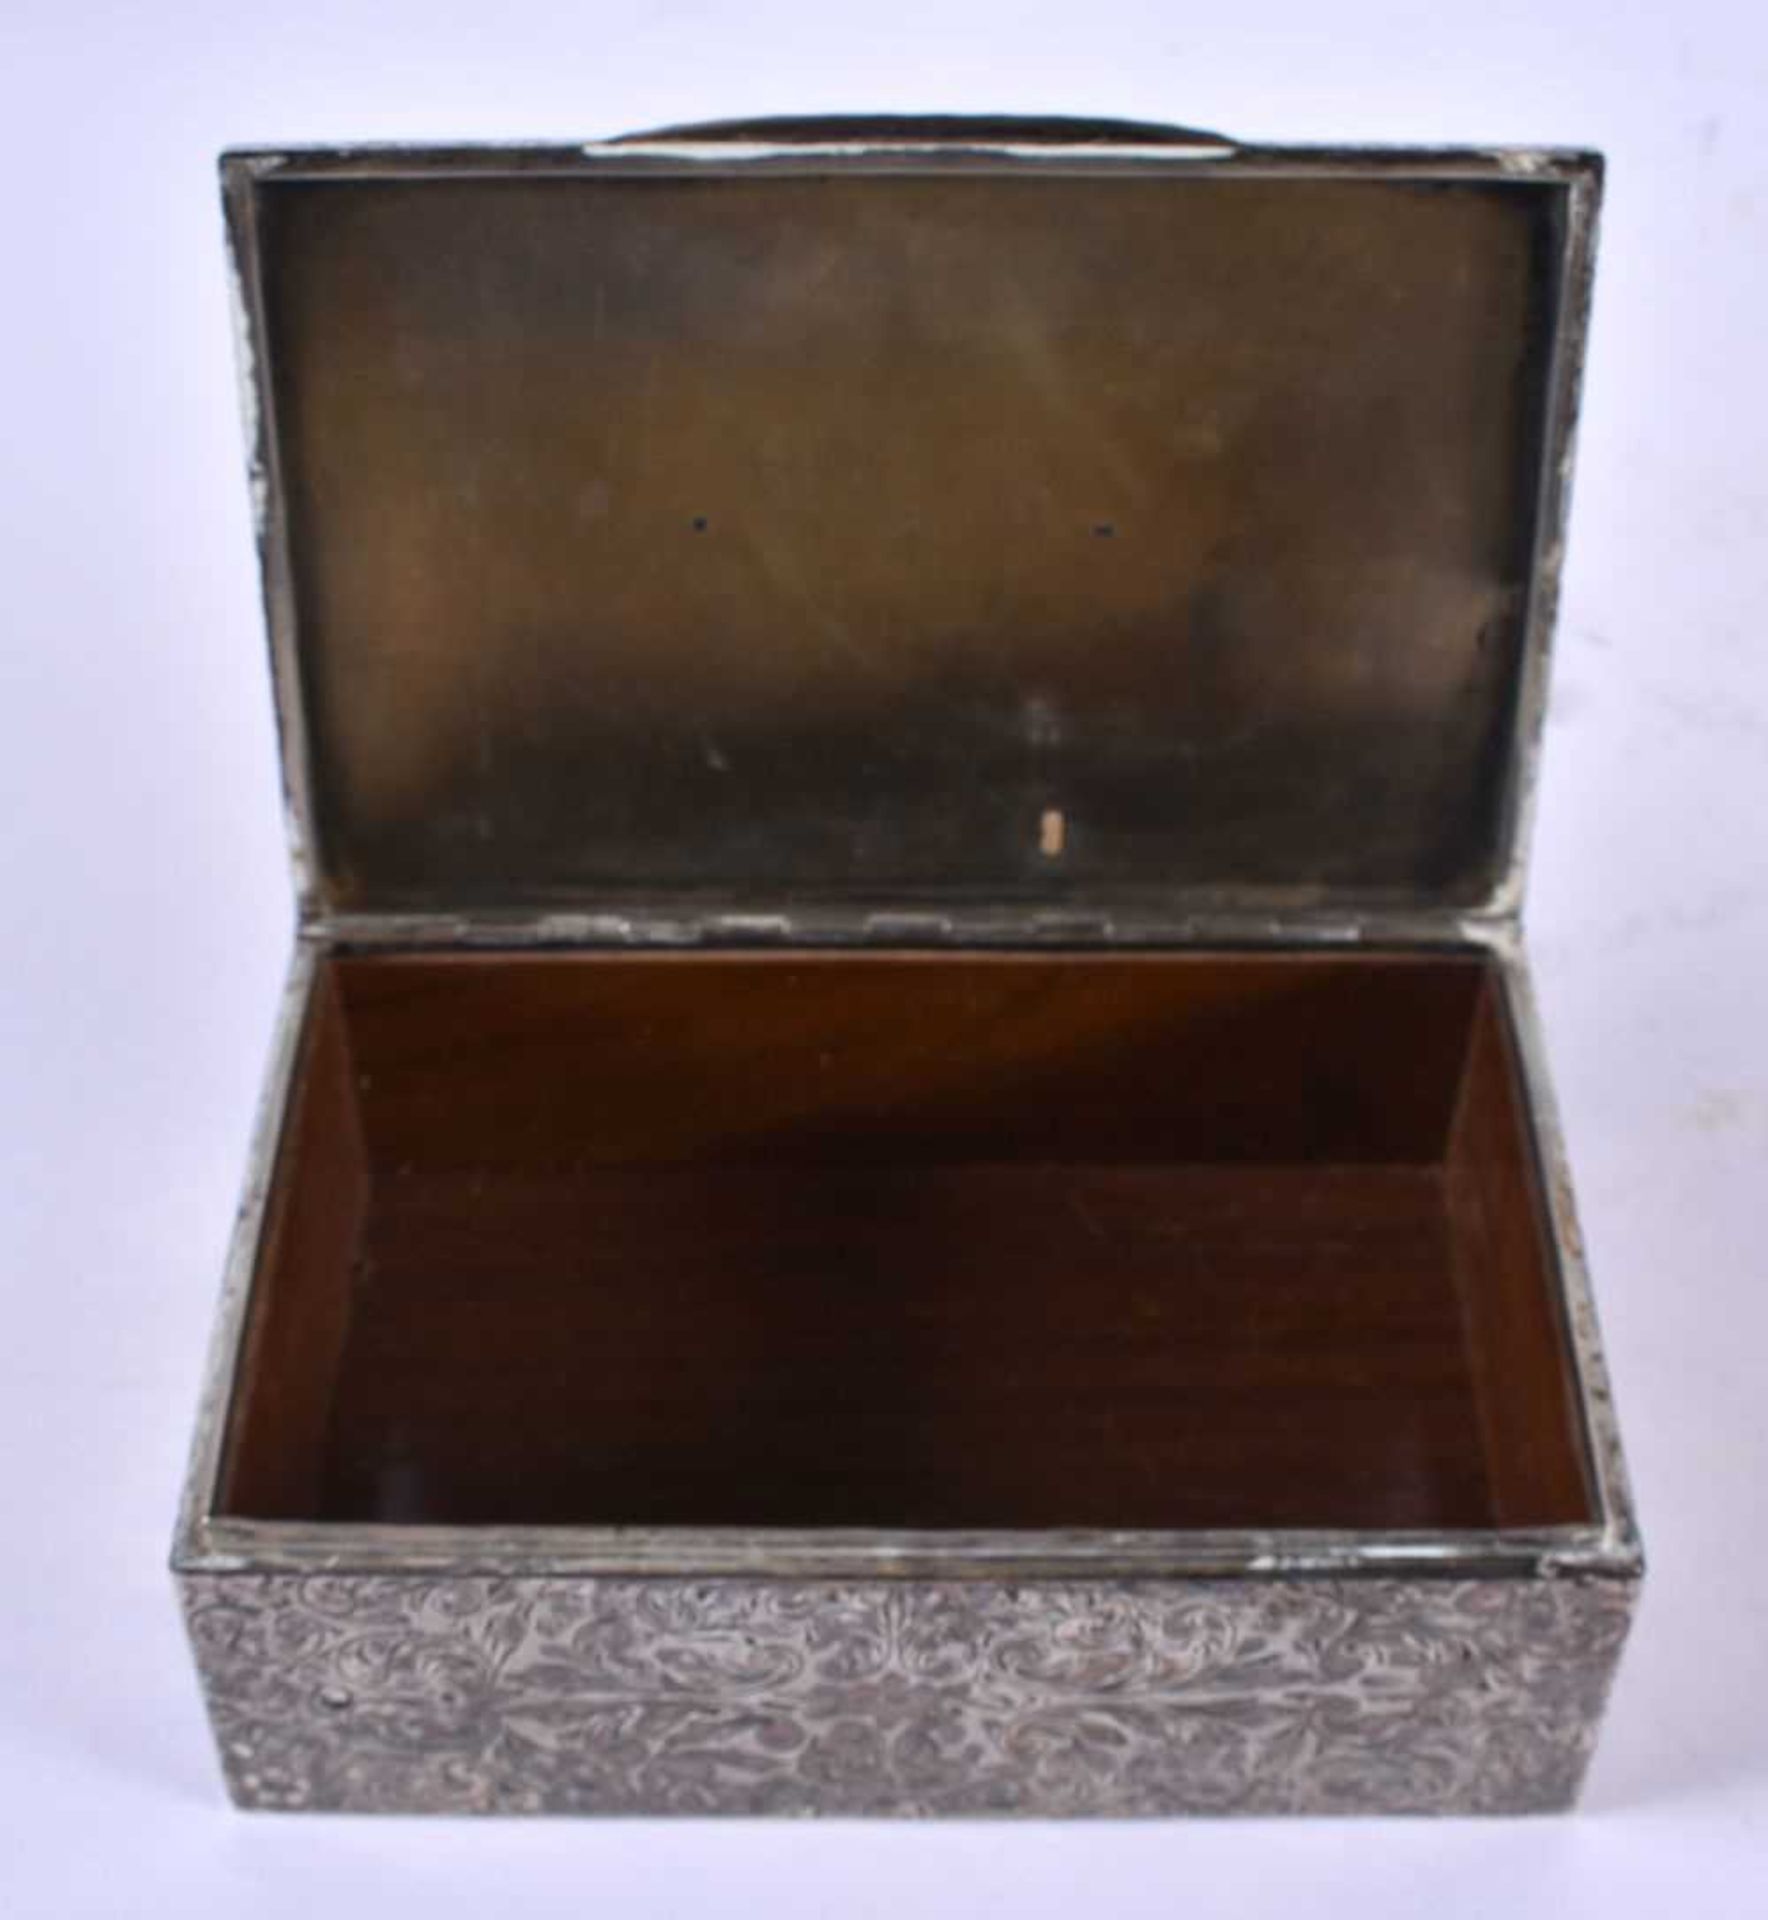 AN ANTIQUE CONTINENTAL ENGRAVED SILVER CASKET. 323 grams overall. 13 cm x 8.5 cm. - Image 2 of 6